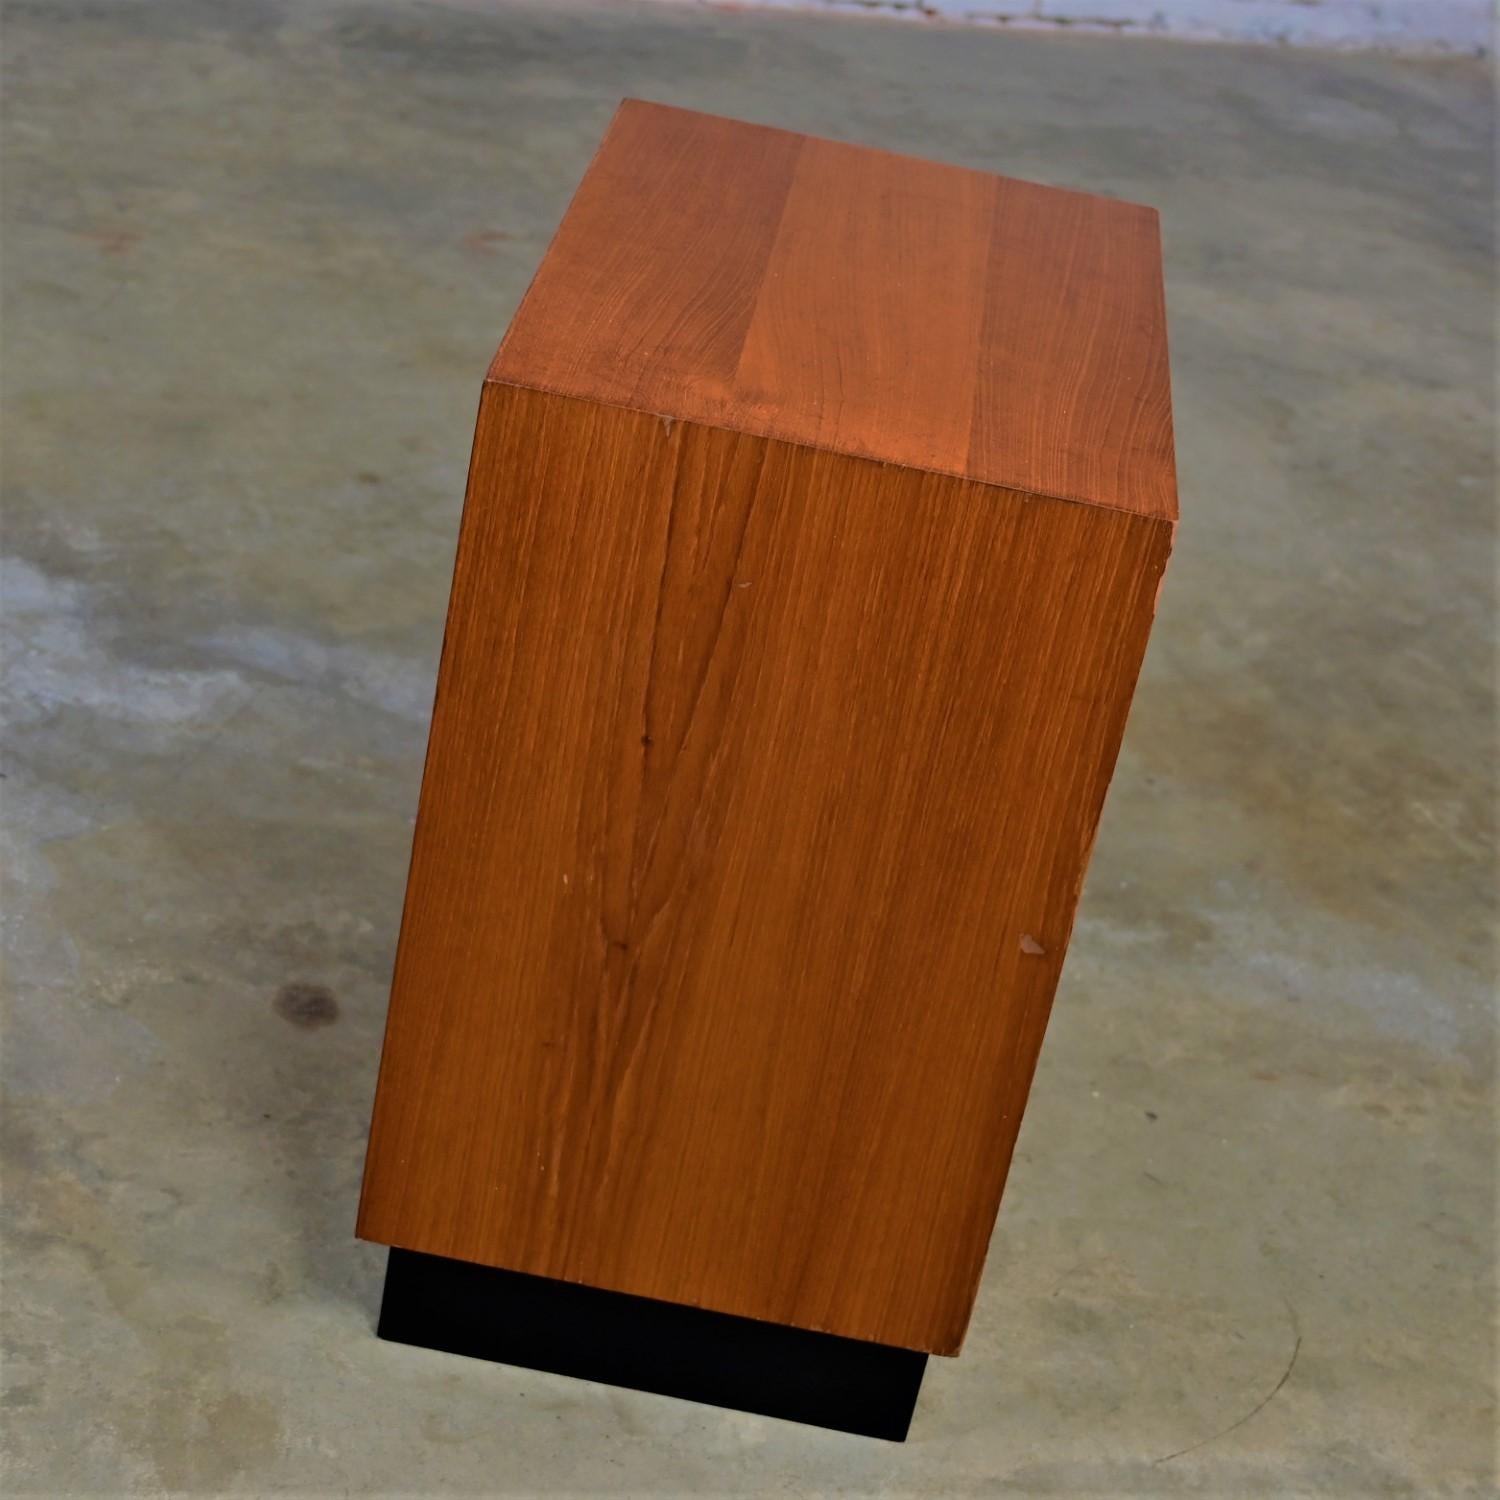 Mid to Late 20th Century Scandinavian Modern Small Teak Cabinet 5 Drawers  For Sale 4